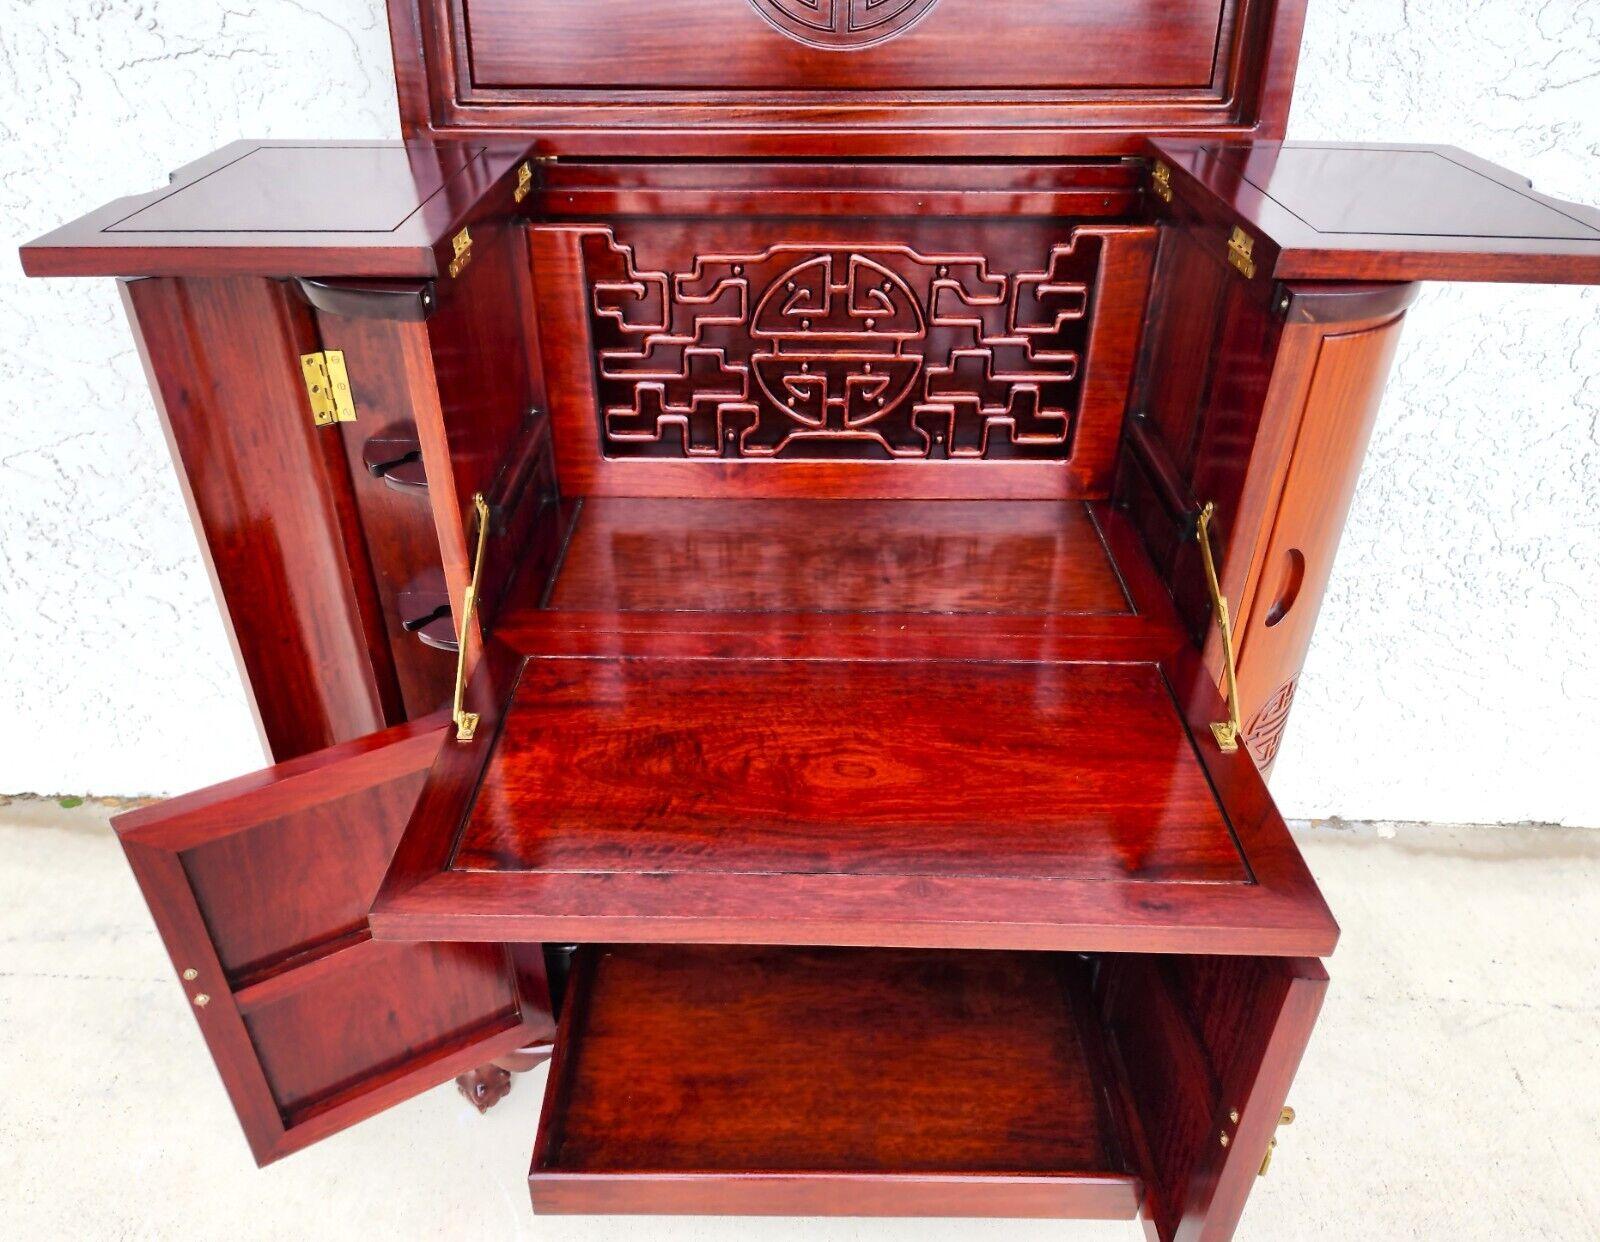 For FULL item description click on CONTINUE READING at the bottom of this page.

Offering One Of Our Recent Palm Beach Estate Fine Furniture Acquisitions Of A 
1970s Asian Oriental Hand-Carved Rosewood Dry Bar Cabinet Flip Top 
Wonderfully detailed